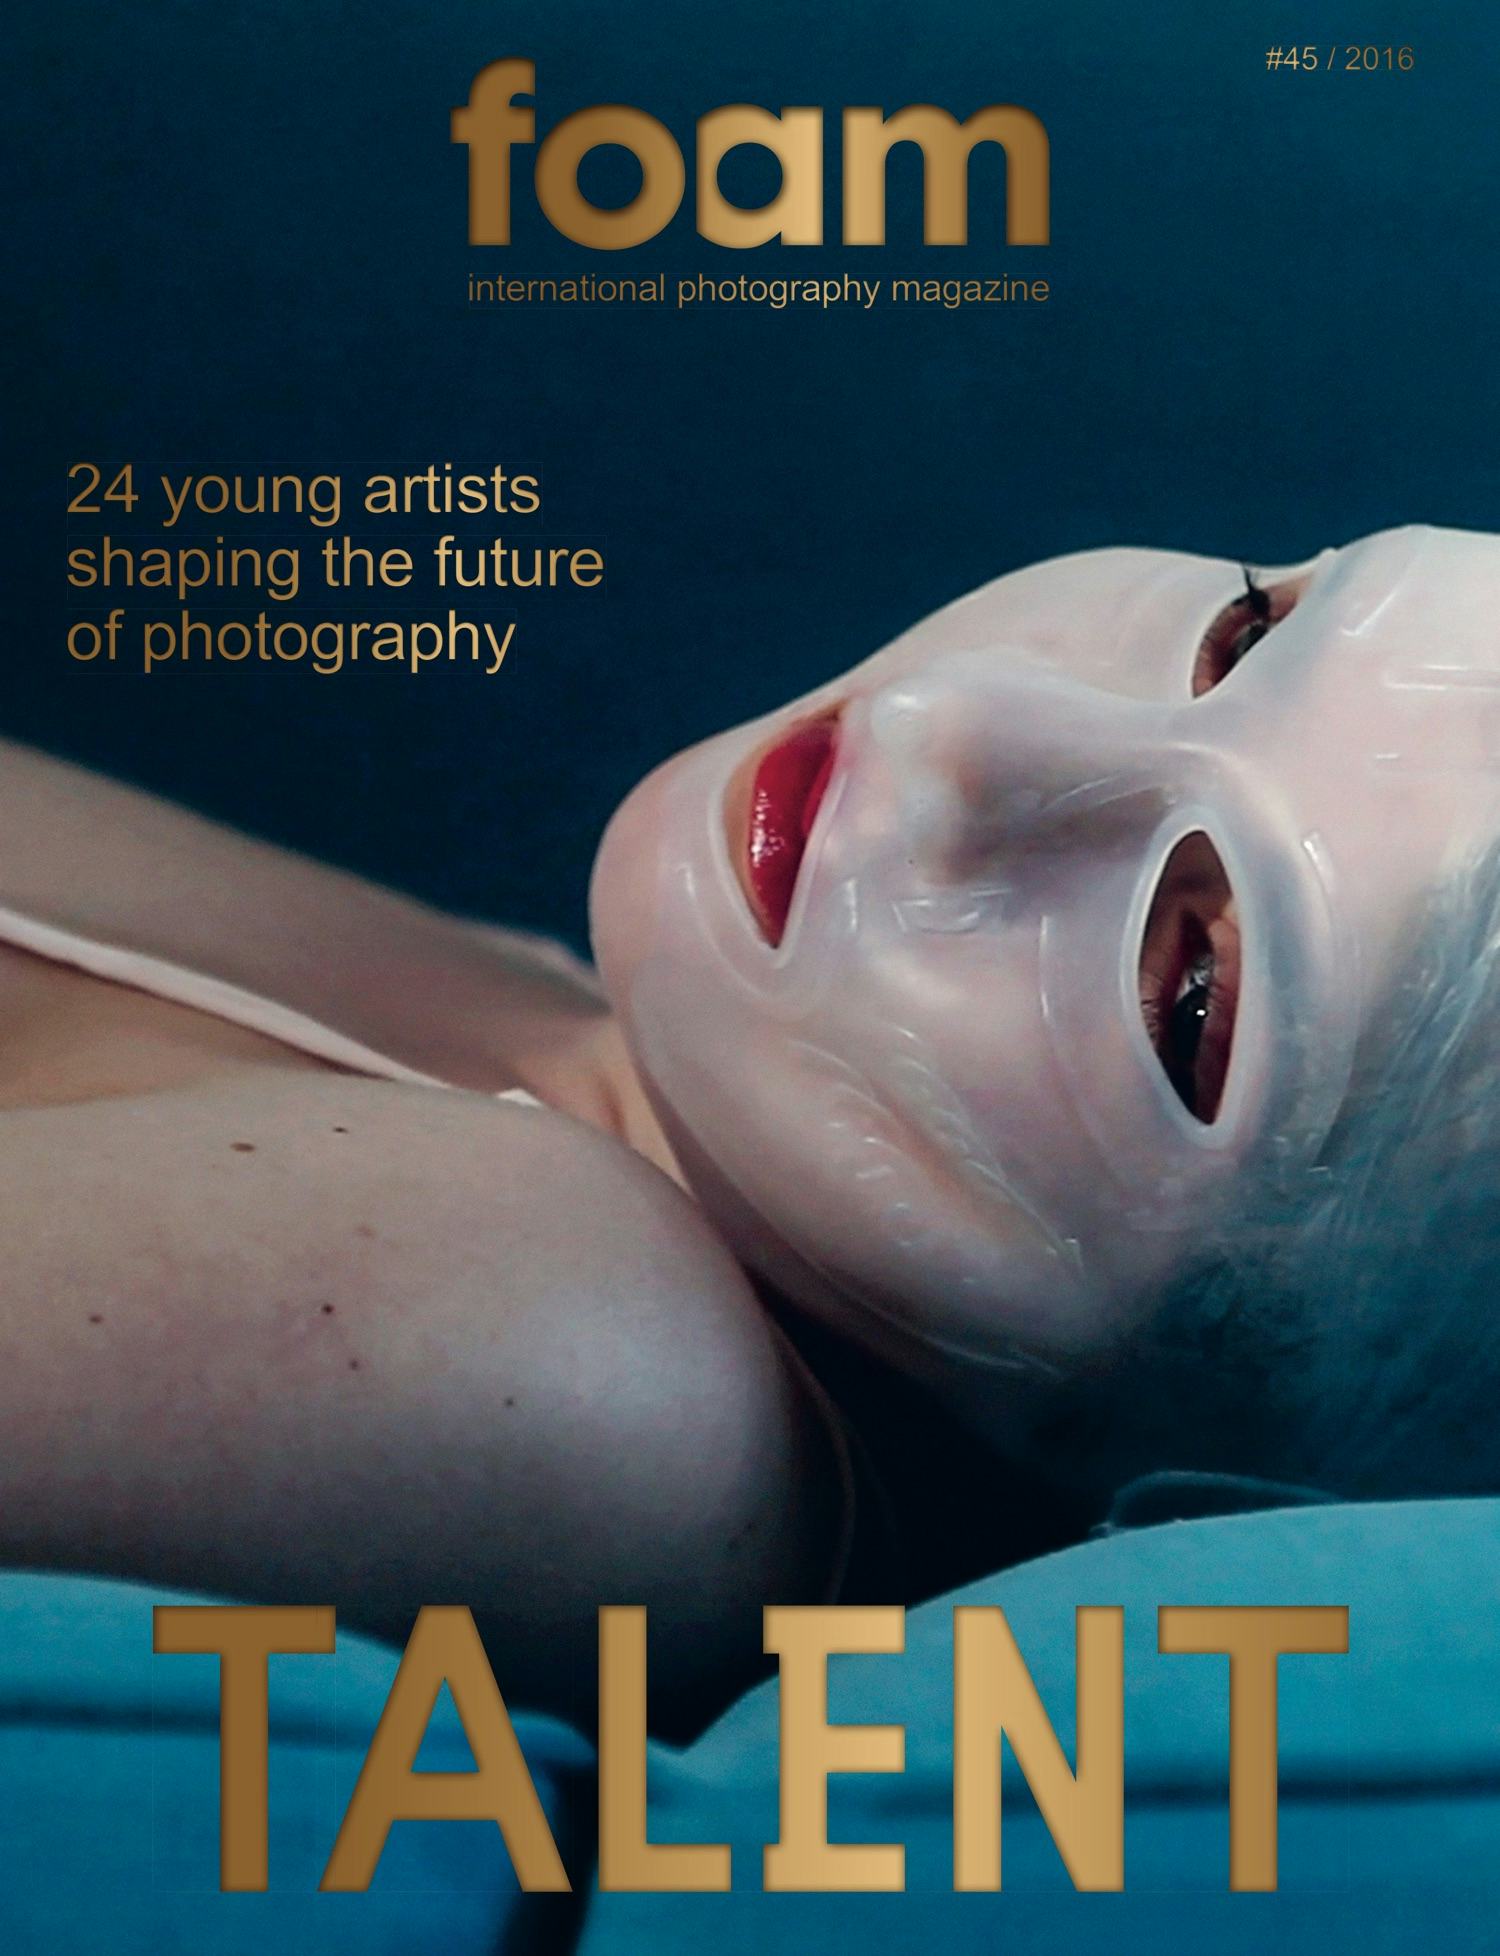 Cover of Foam Magazine #45: Talent showing a picture by Juno Calypso and golden text